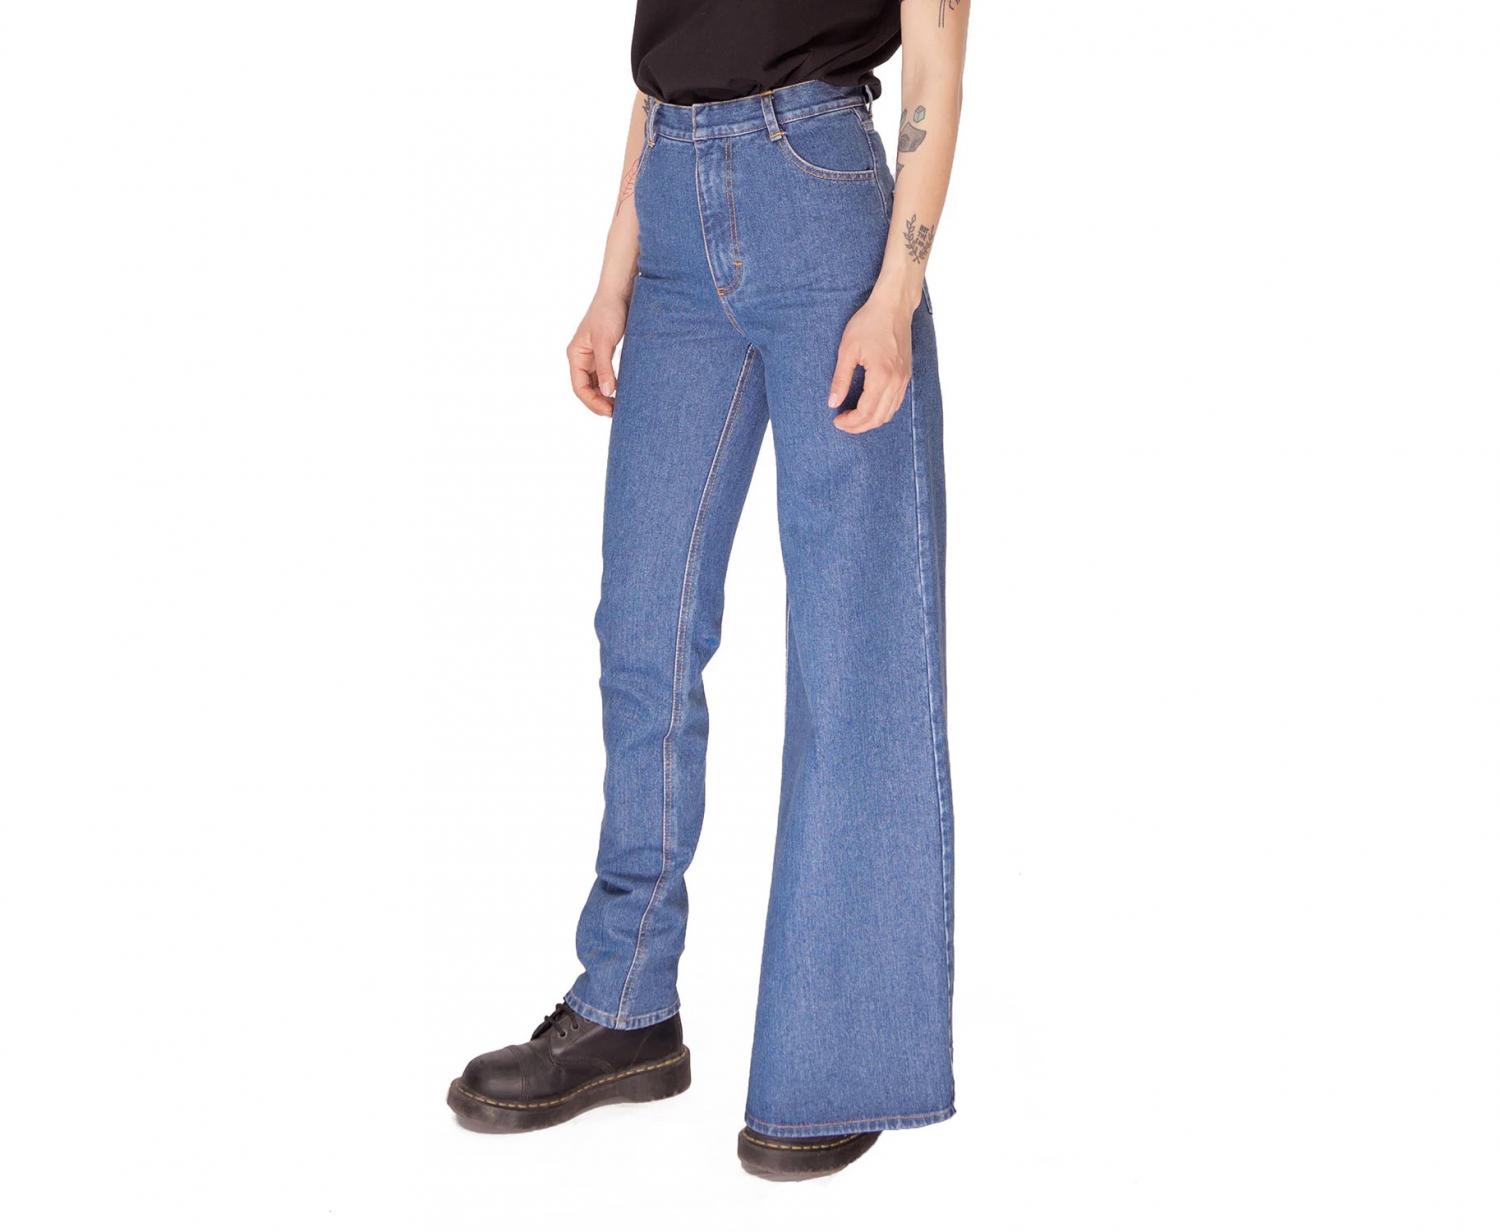 Ksenia Schnaider Asymmetrical Skinny and Wide Leg Jeans - Double-style jeans